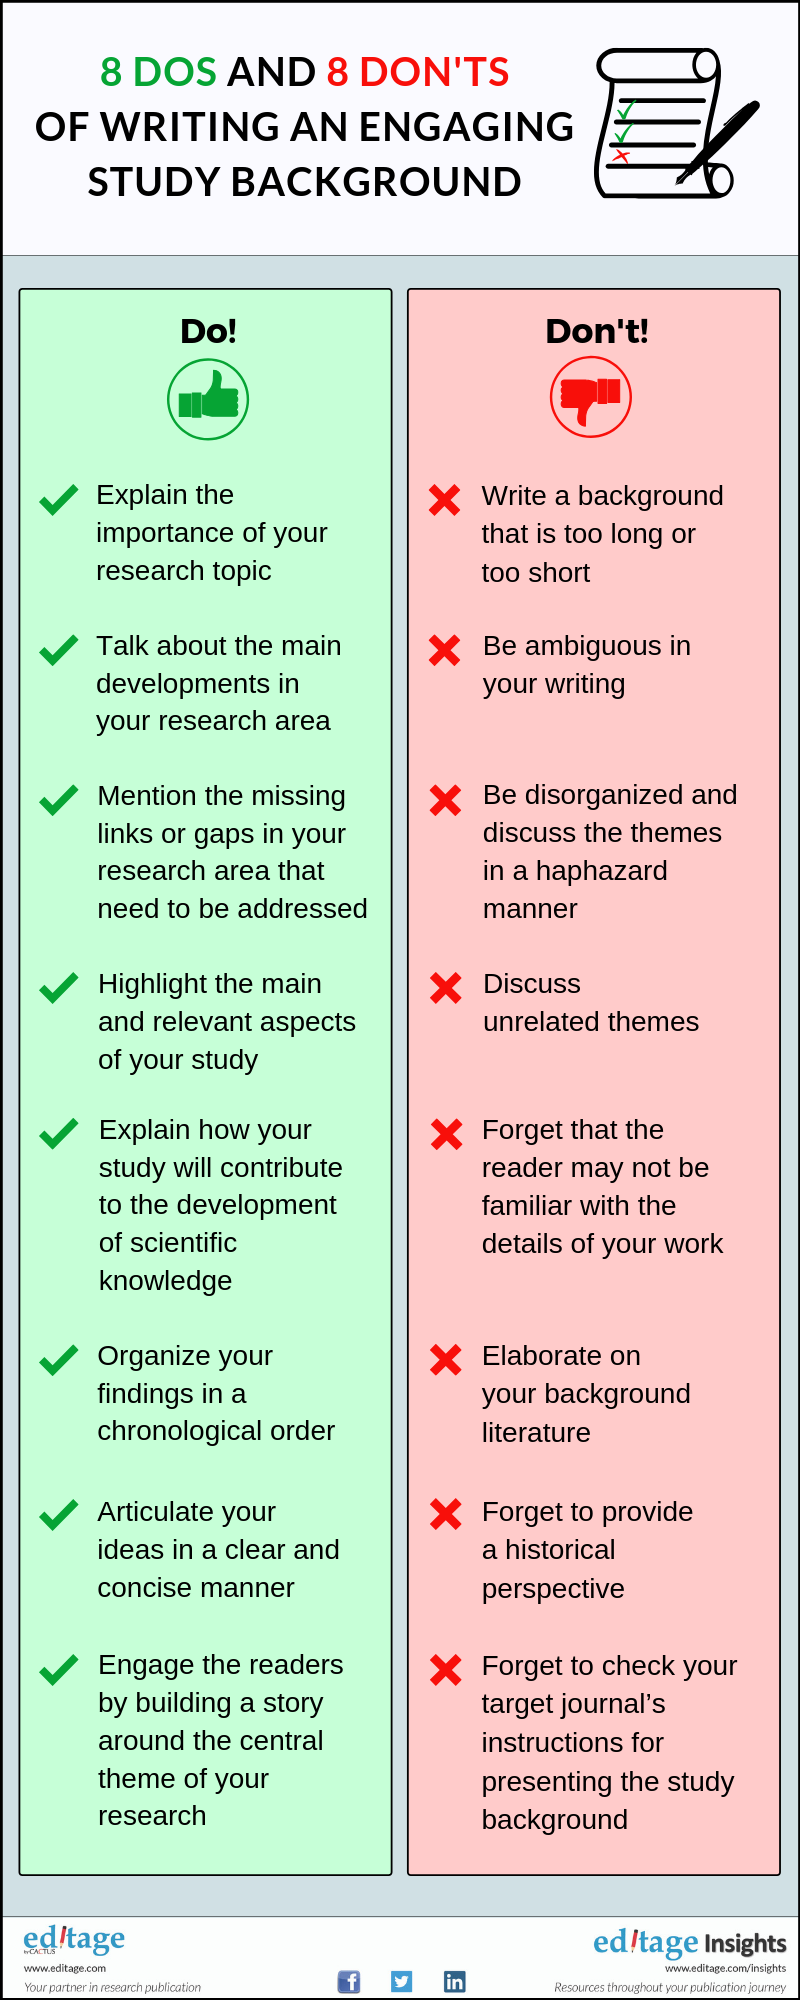 8 Dos and 8 don'ts of writing an engaging study background | Editage  Insights